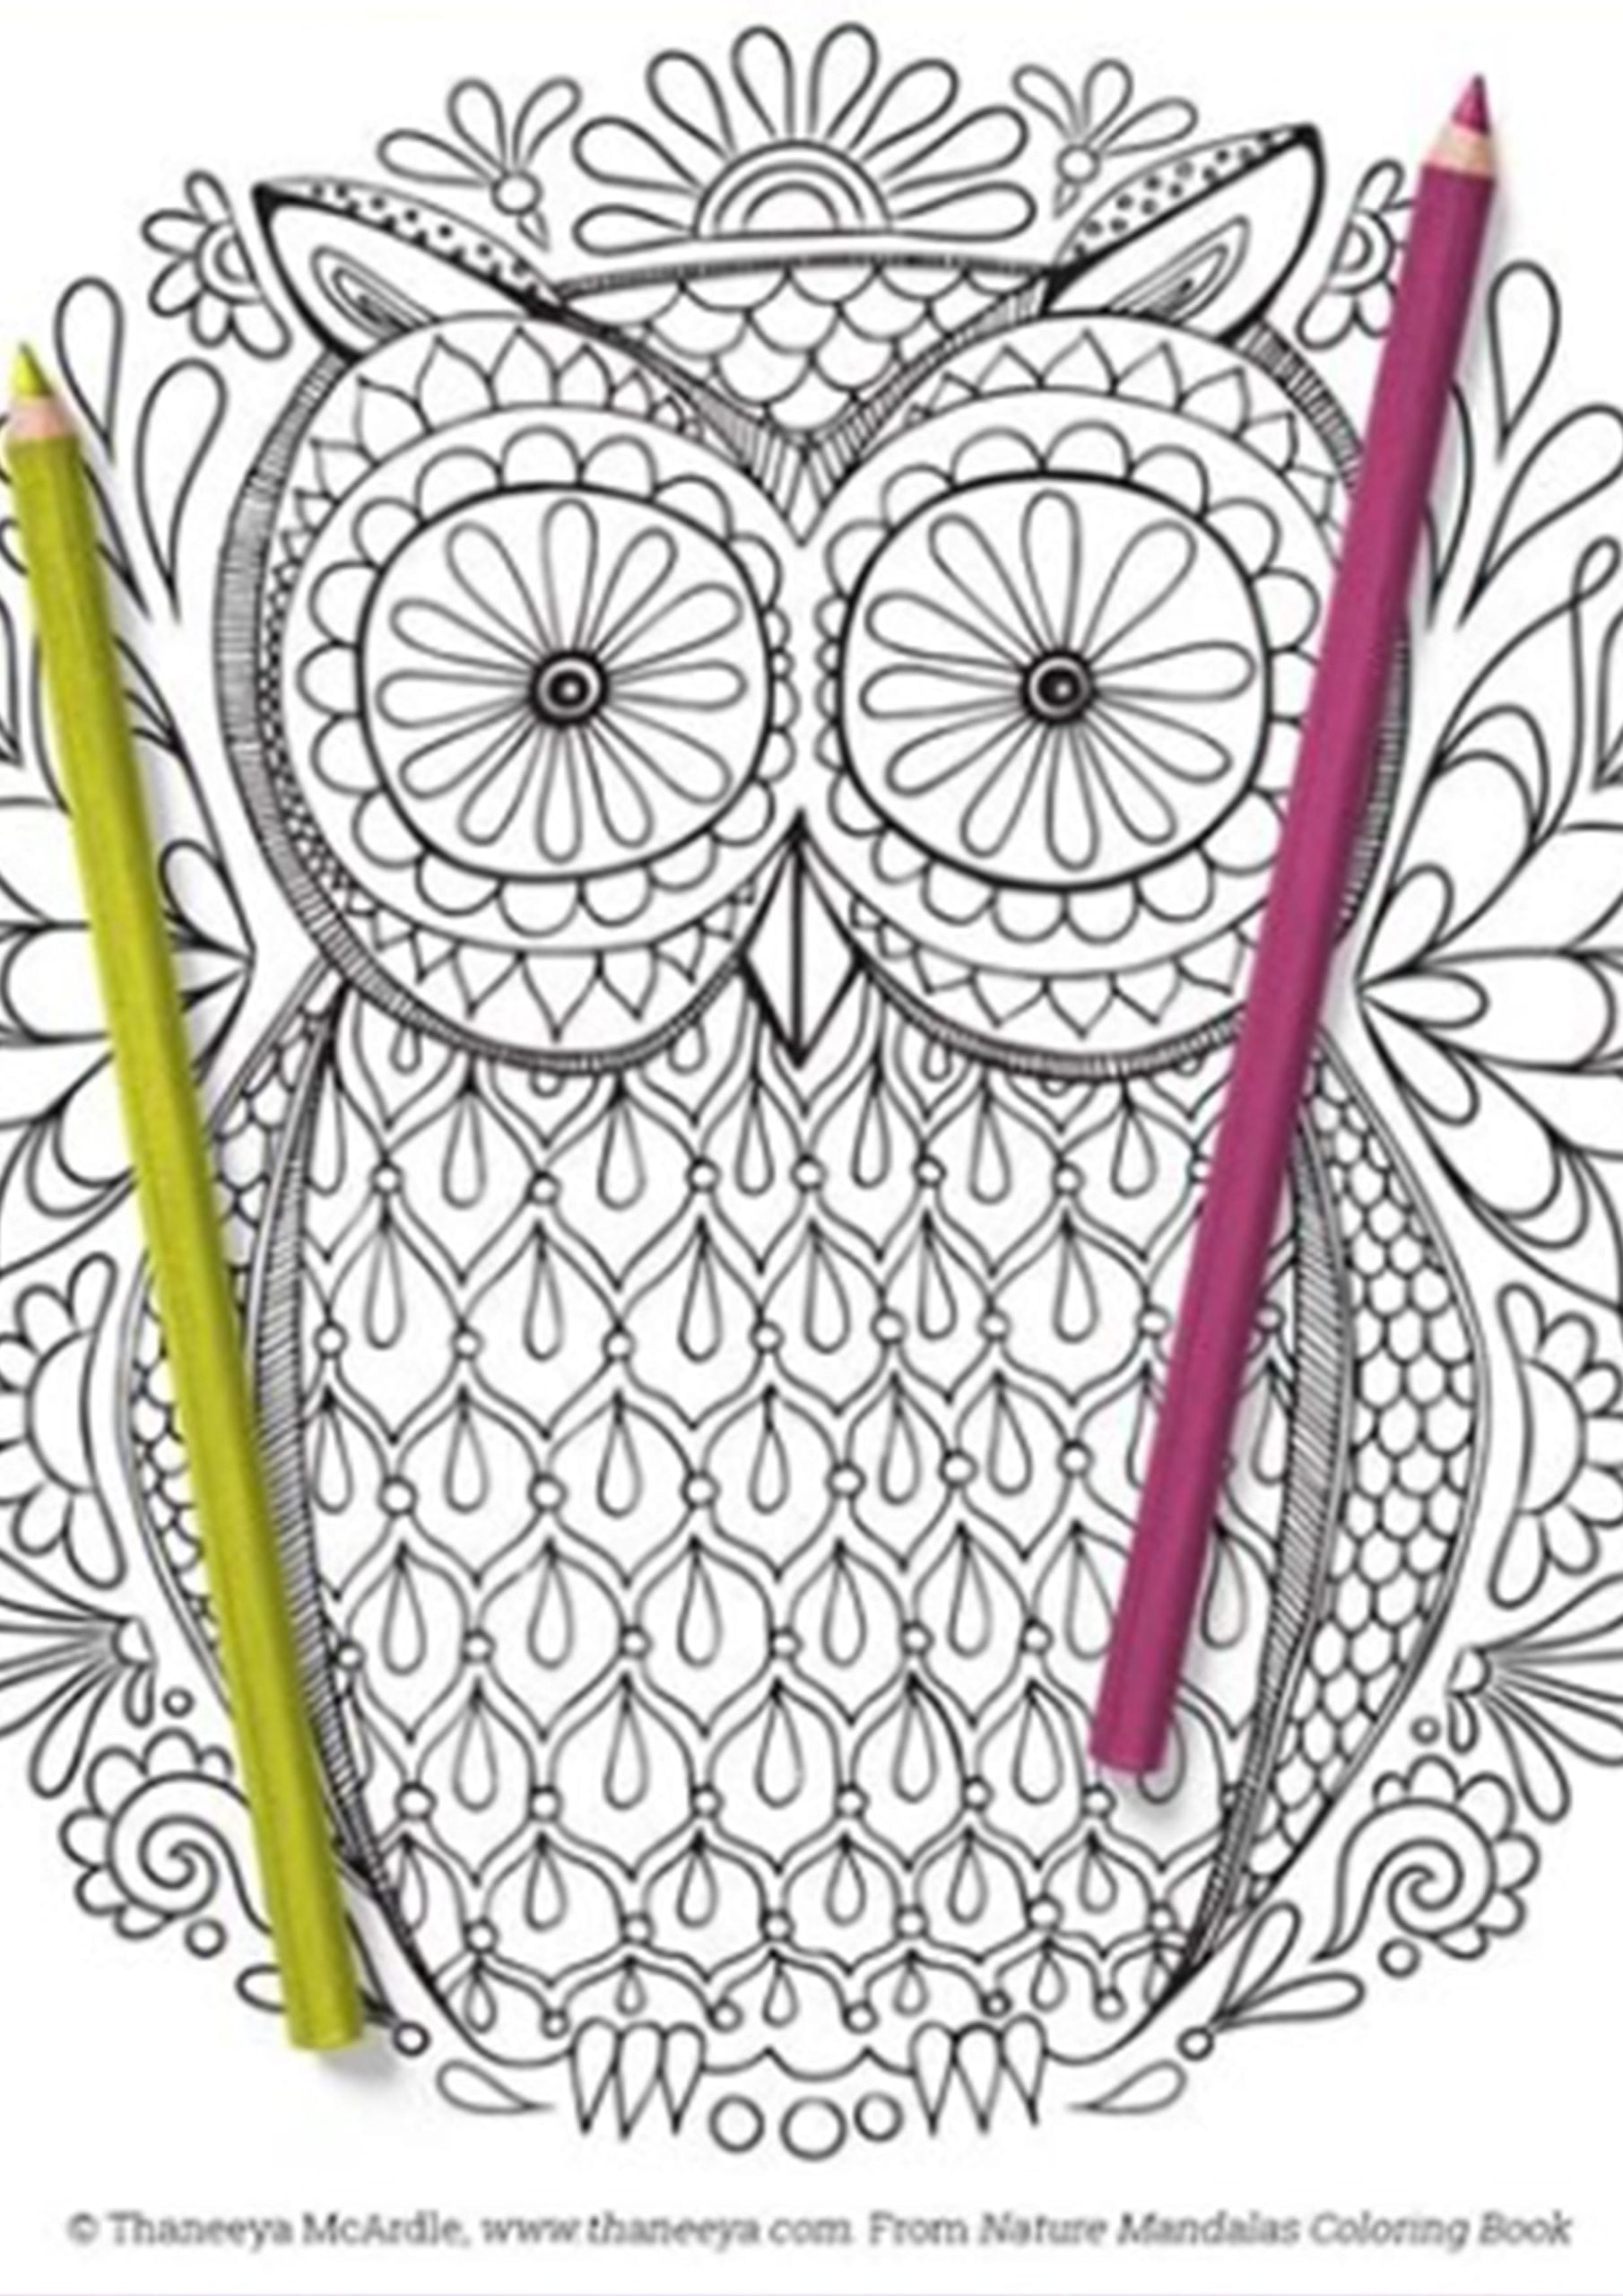 NSFW—But Safe for WFH—Printable Adults Coloring Pages